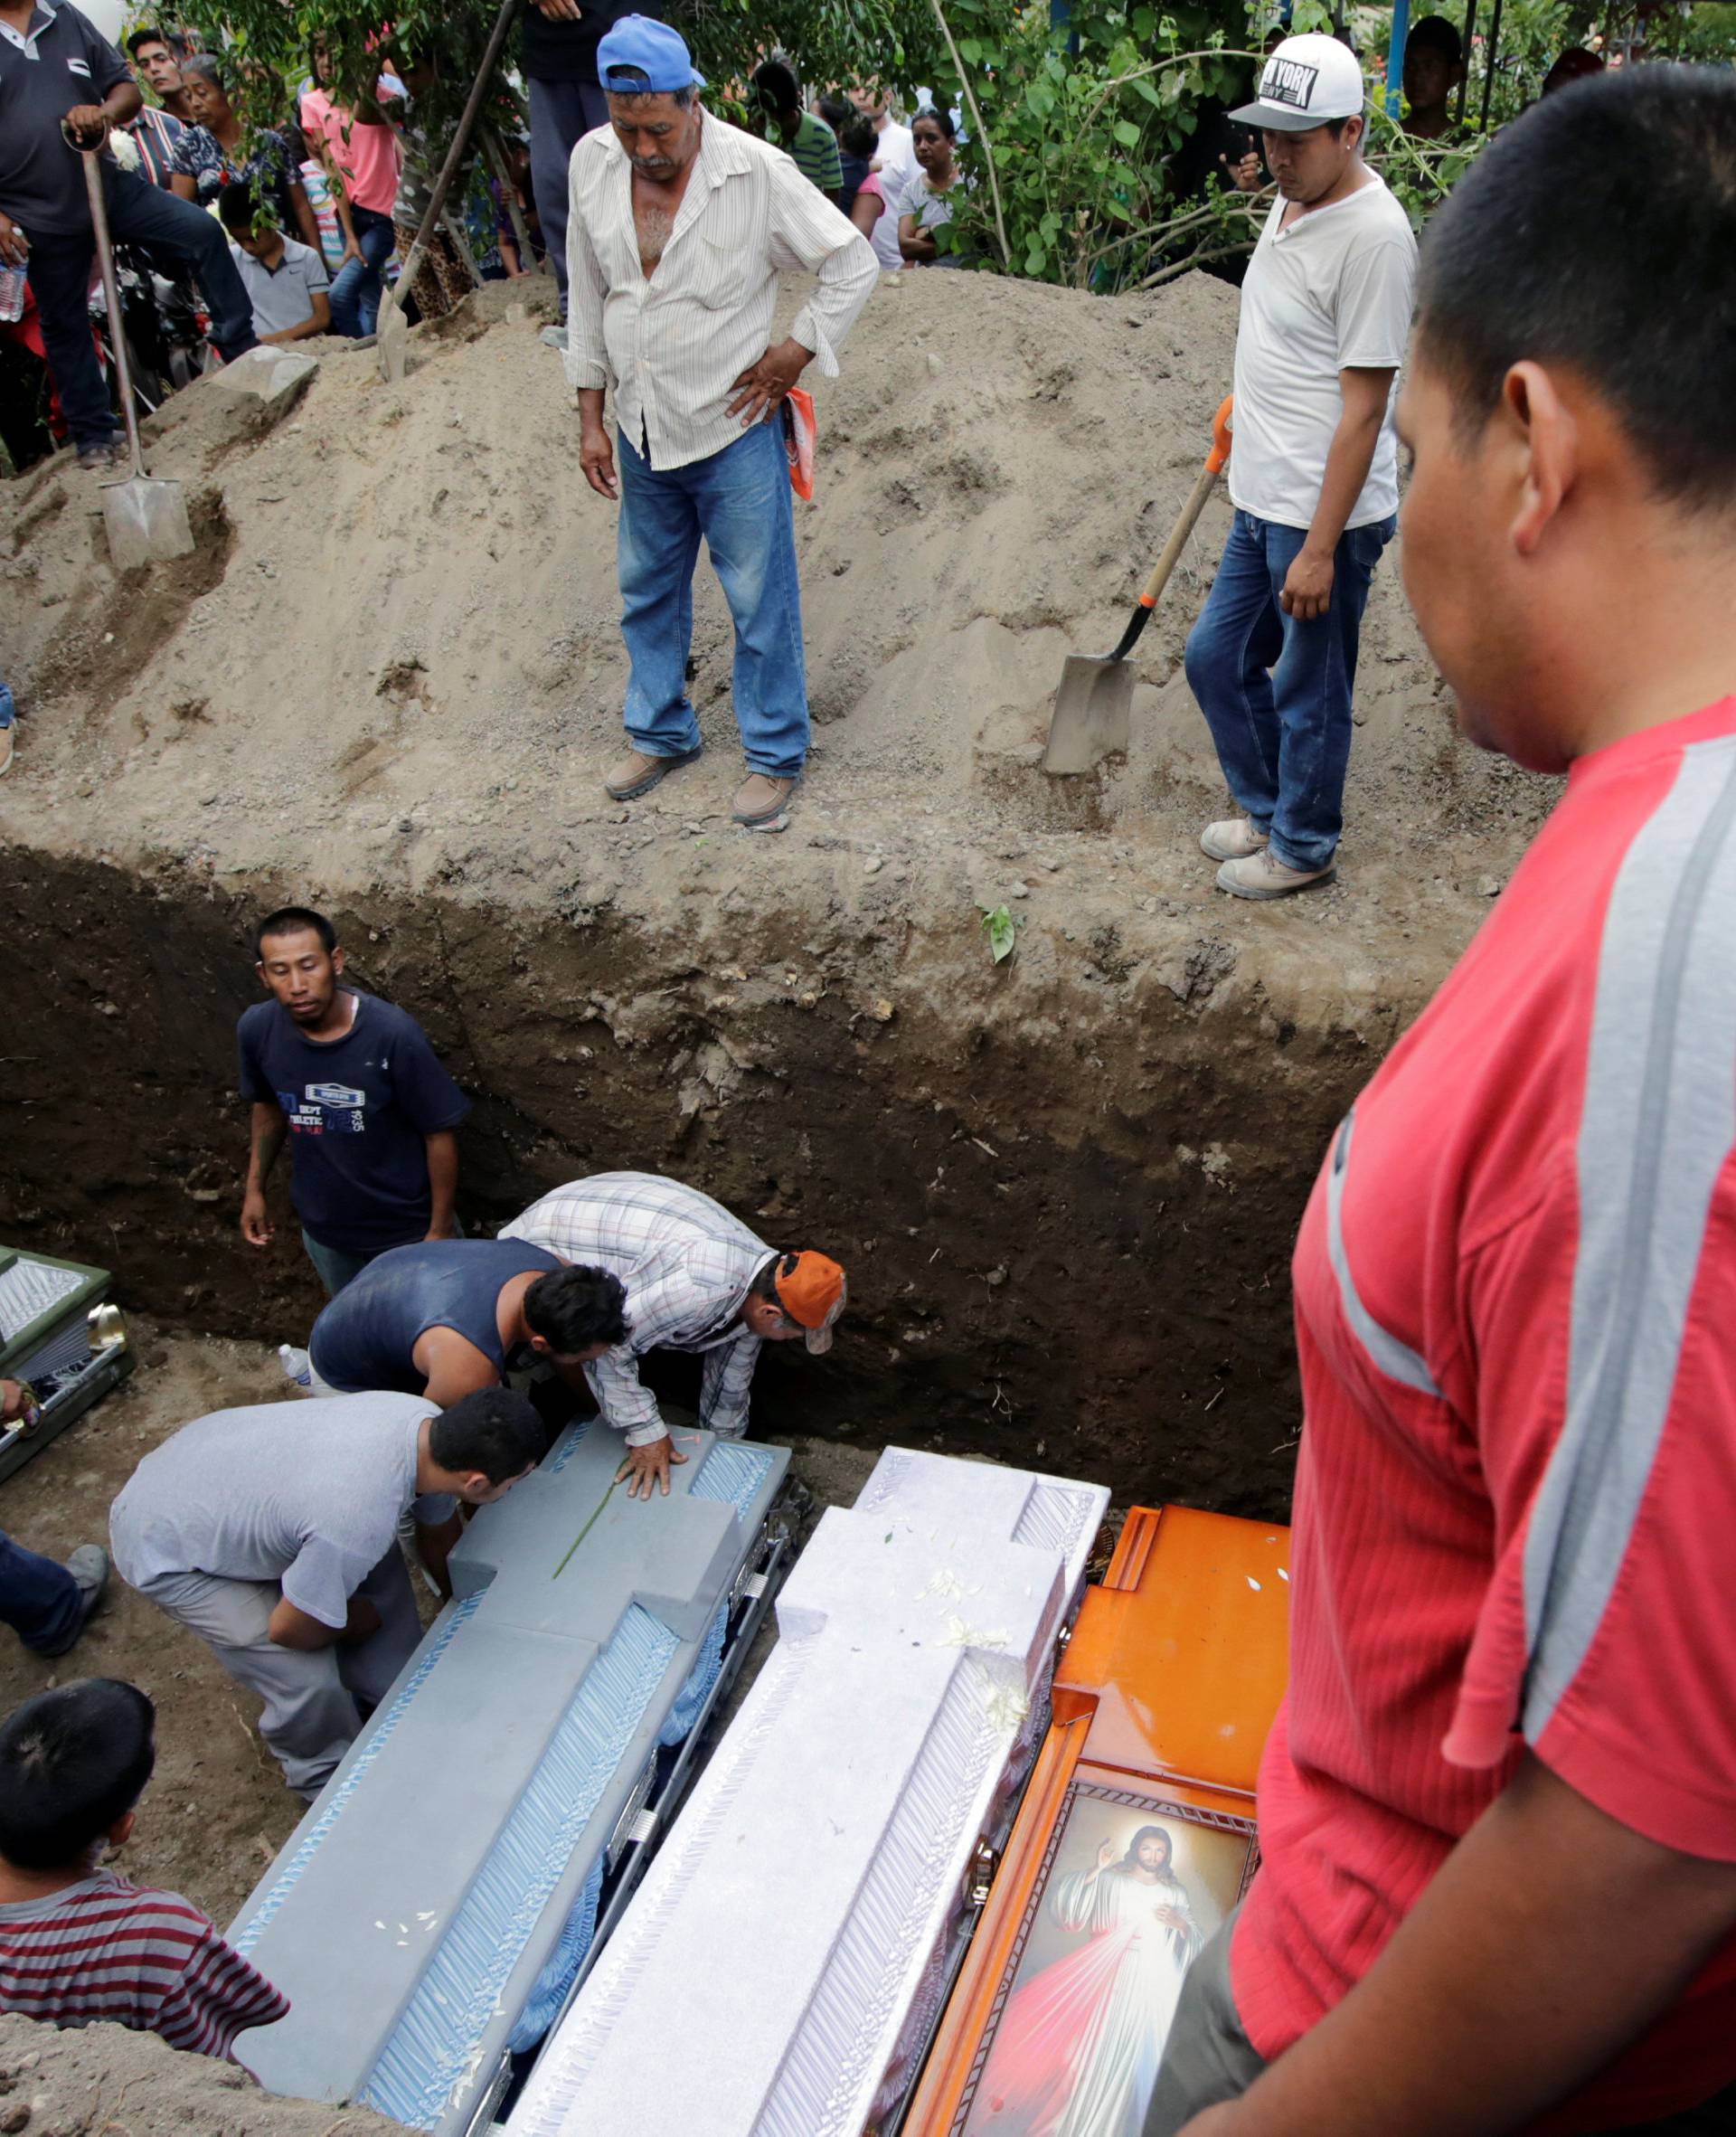 People arrange caskets of earthquake victims in a grave, in Atzala